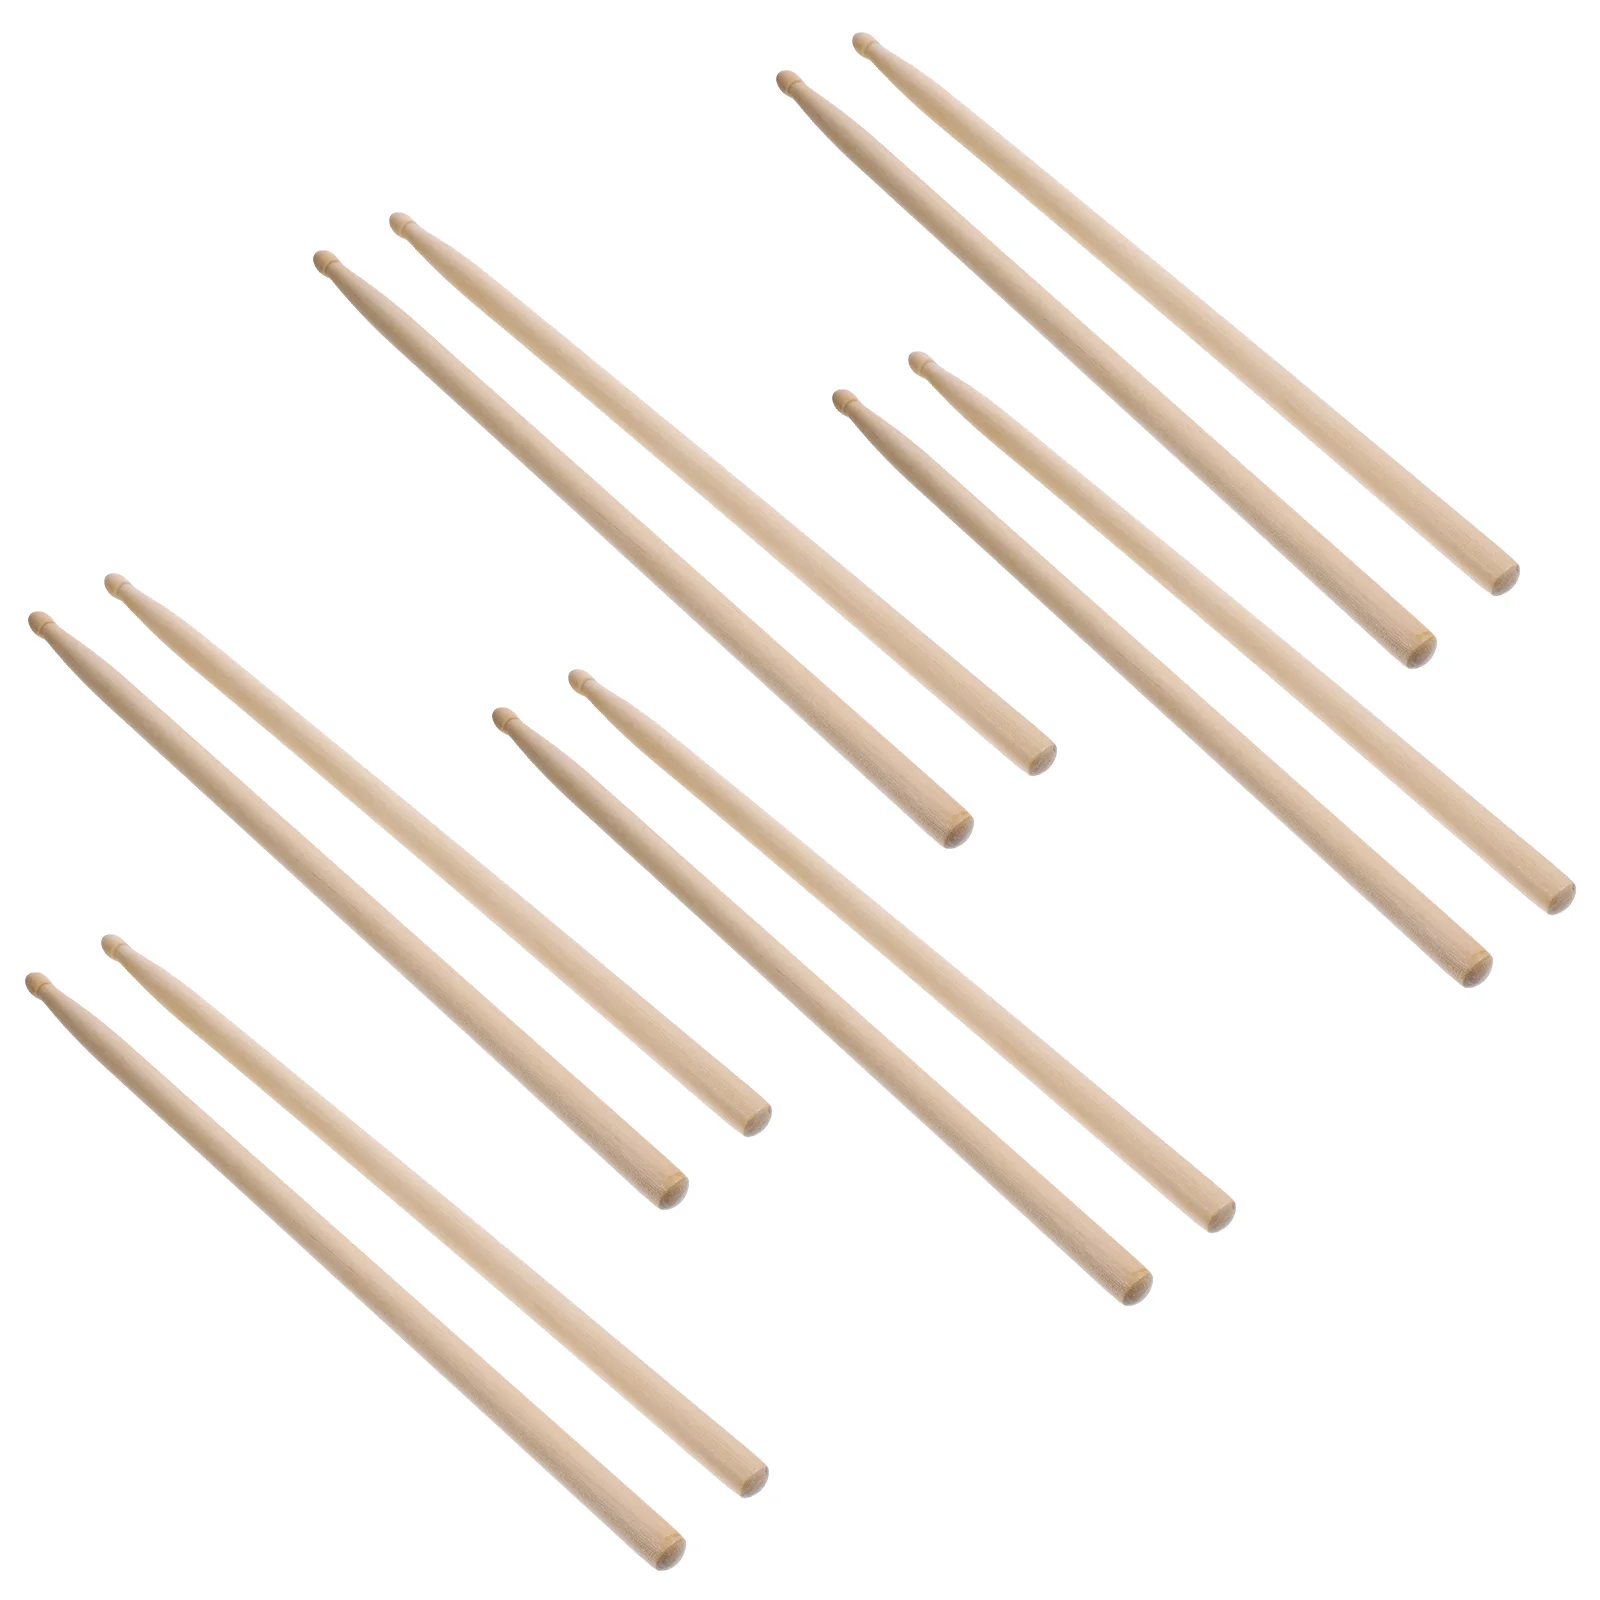 Instrument Mallets 5a Maple Wood Sticks Musical Instruments Drumsticks For Practice tongue drum drumstick percussion instrument mallets marimba drumsticks practice mallets for beginners